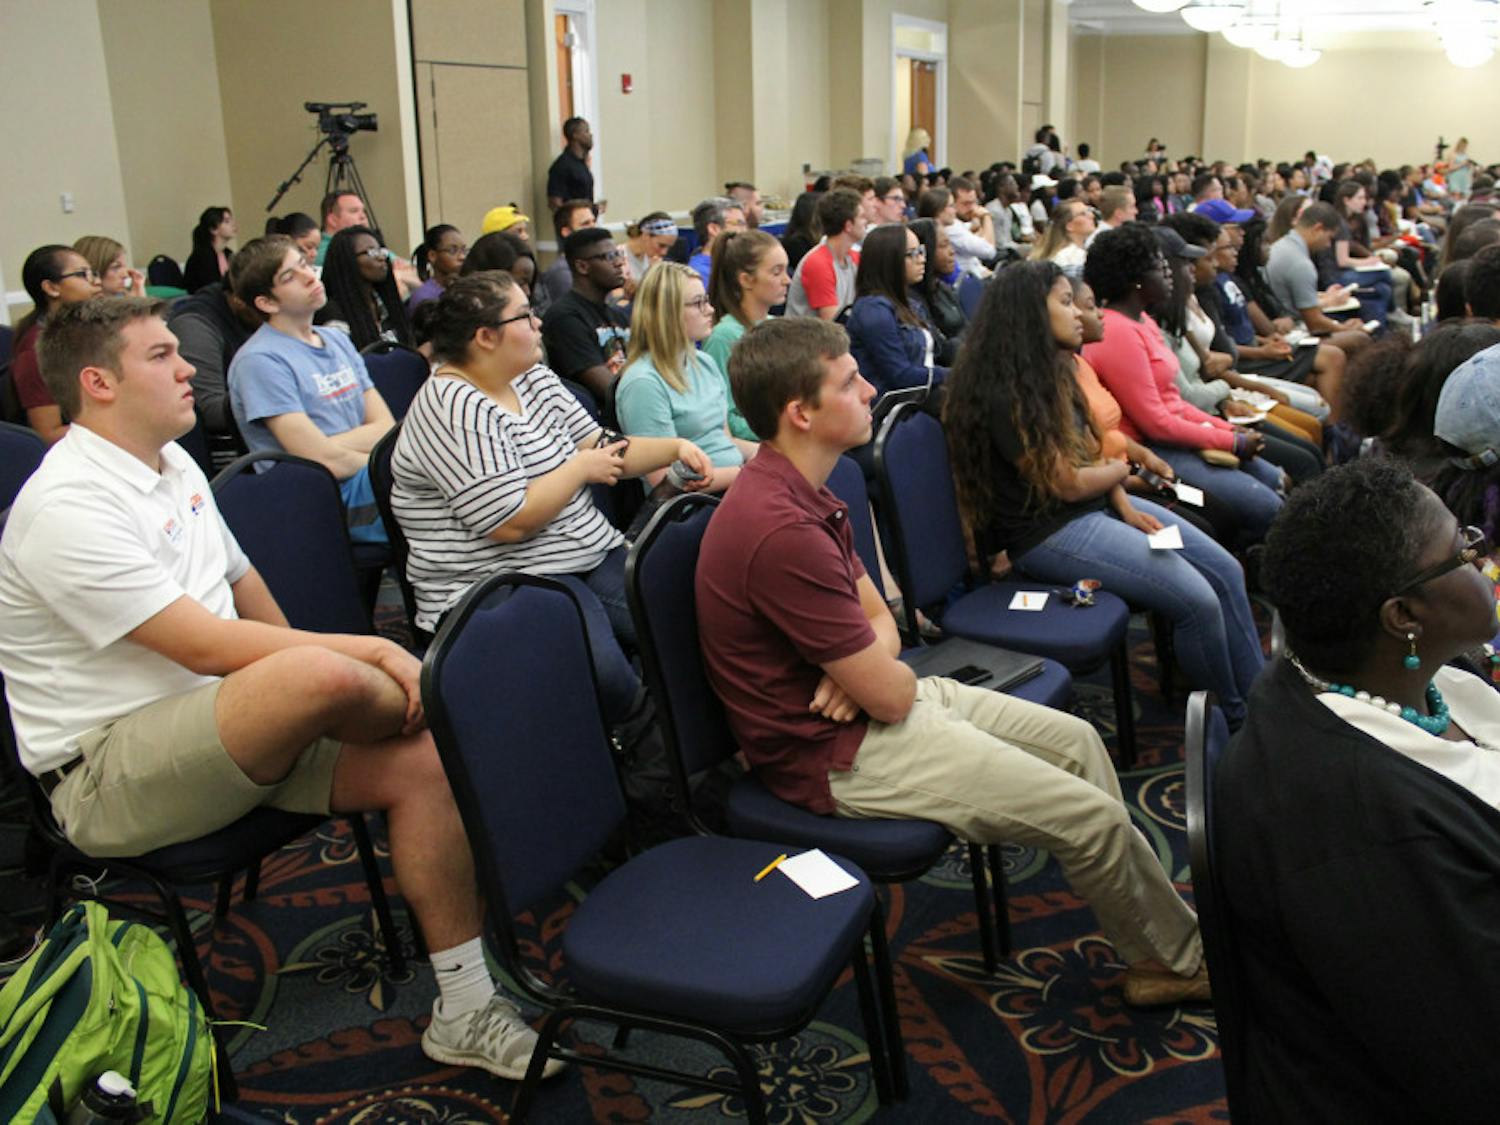 Around 250 people crowd the UF president's room at Emerson Hall for the town hall meeting with UF President Kent Fuchs on Monday. The town hall meeting focused on the relationship between the administration and diversity at UF.